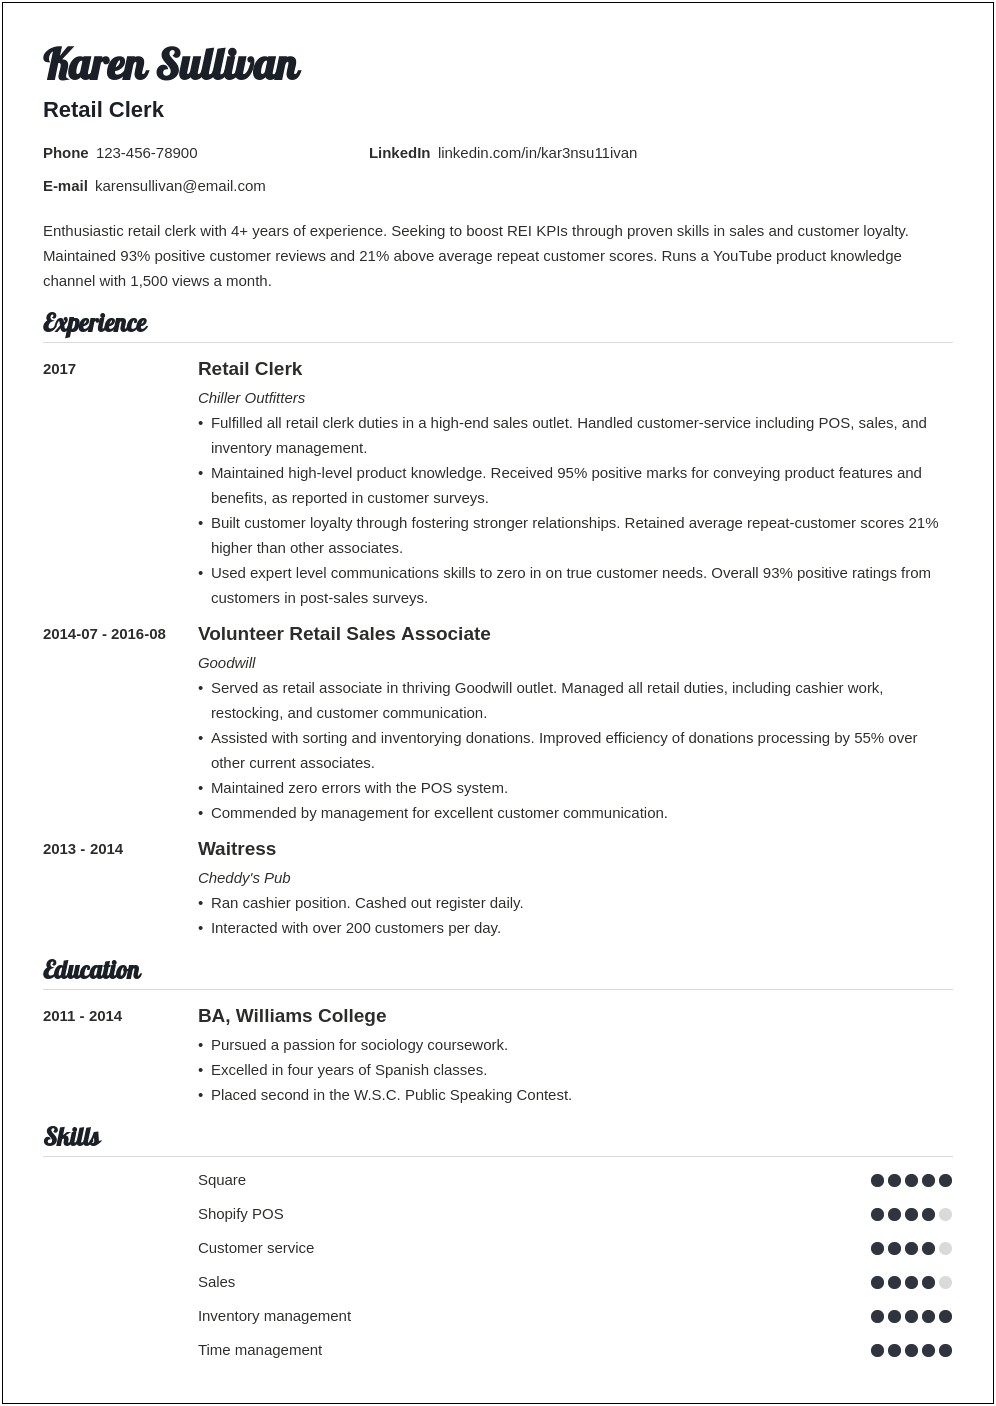 Example Resume For Retail Customer Service